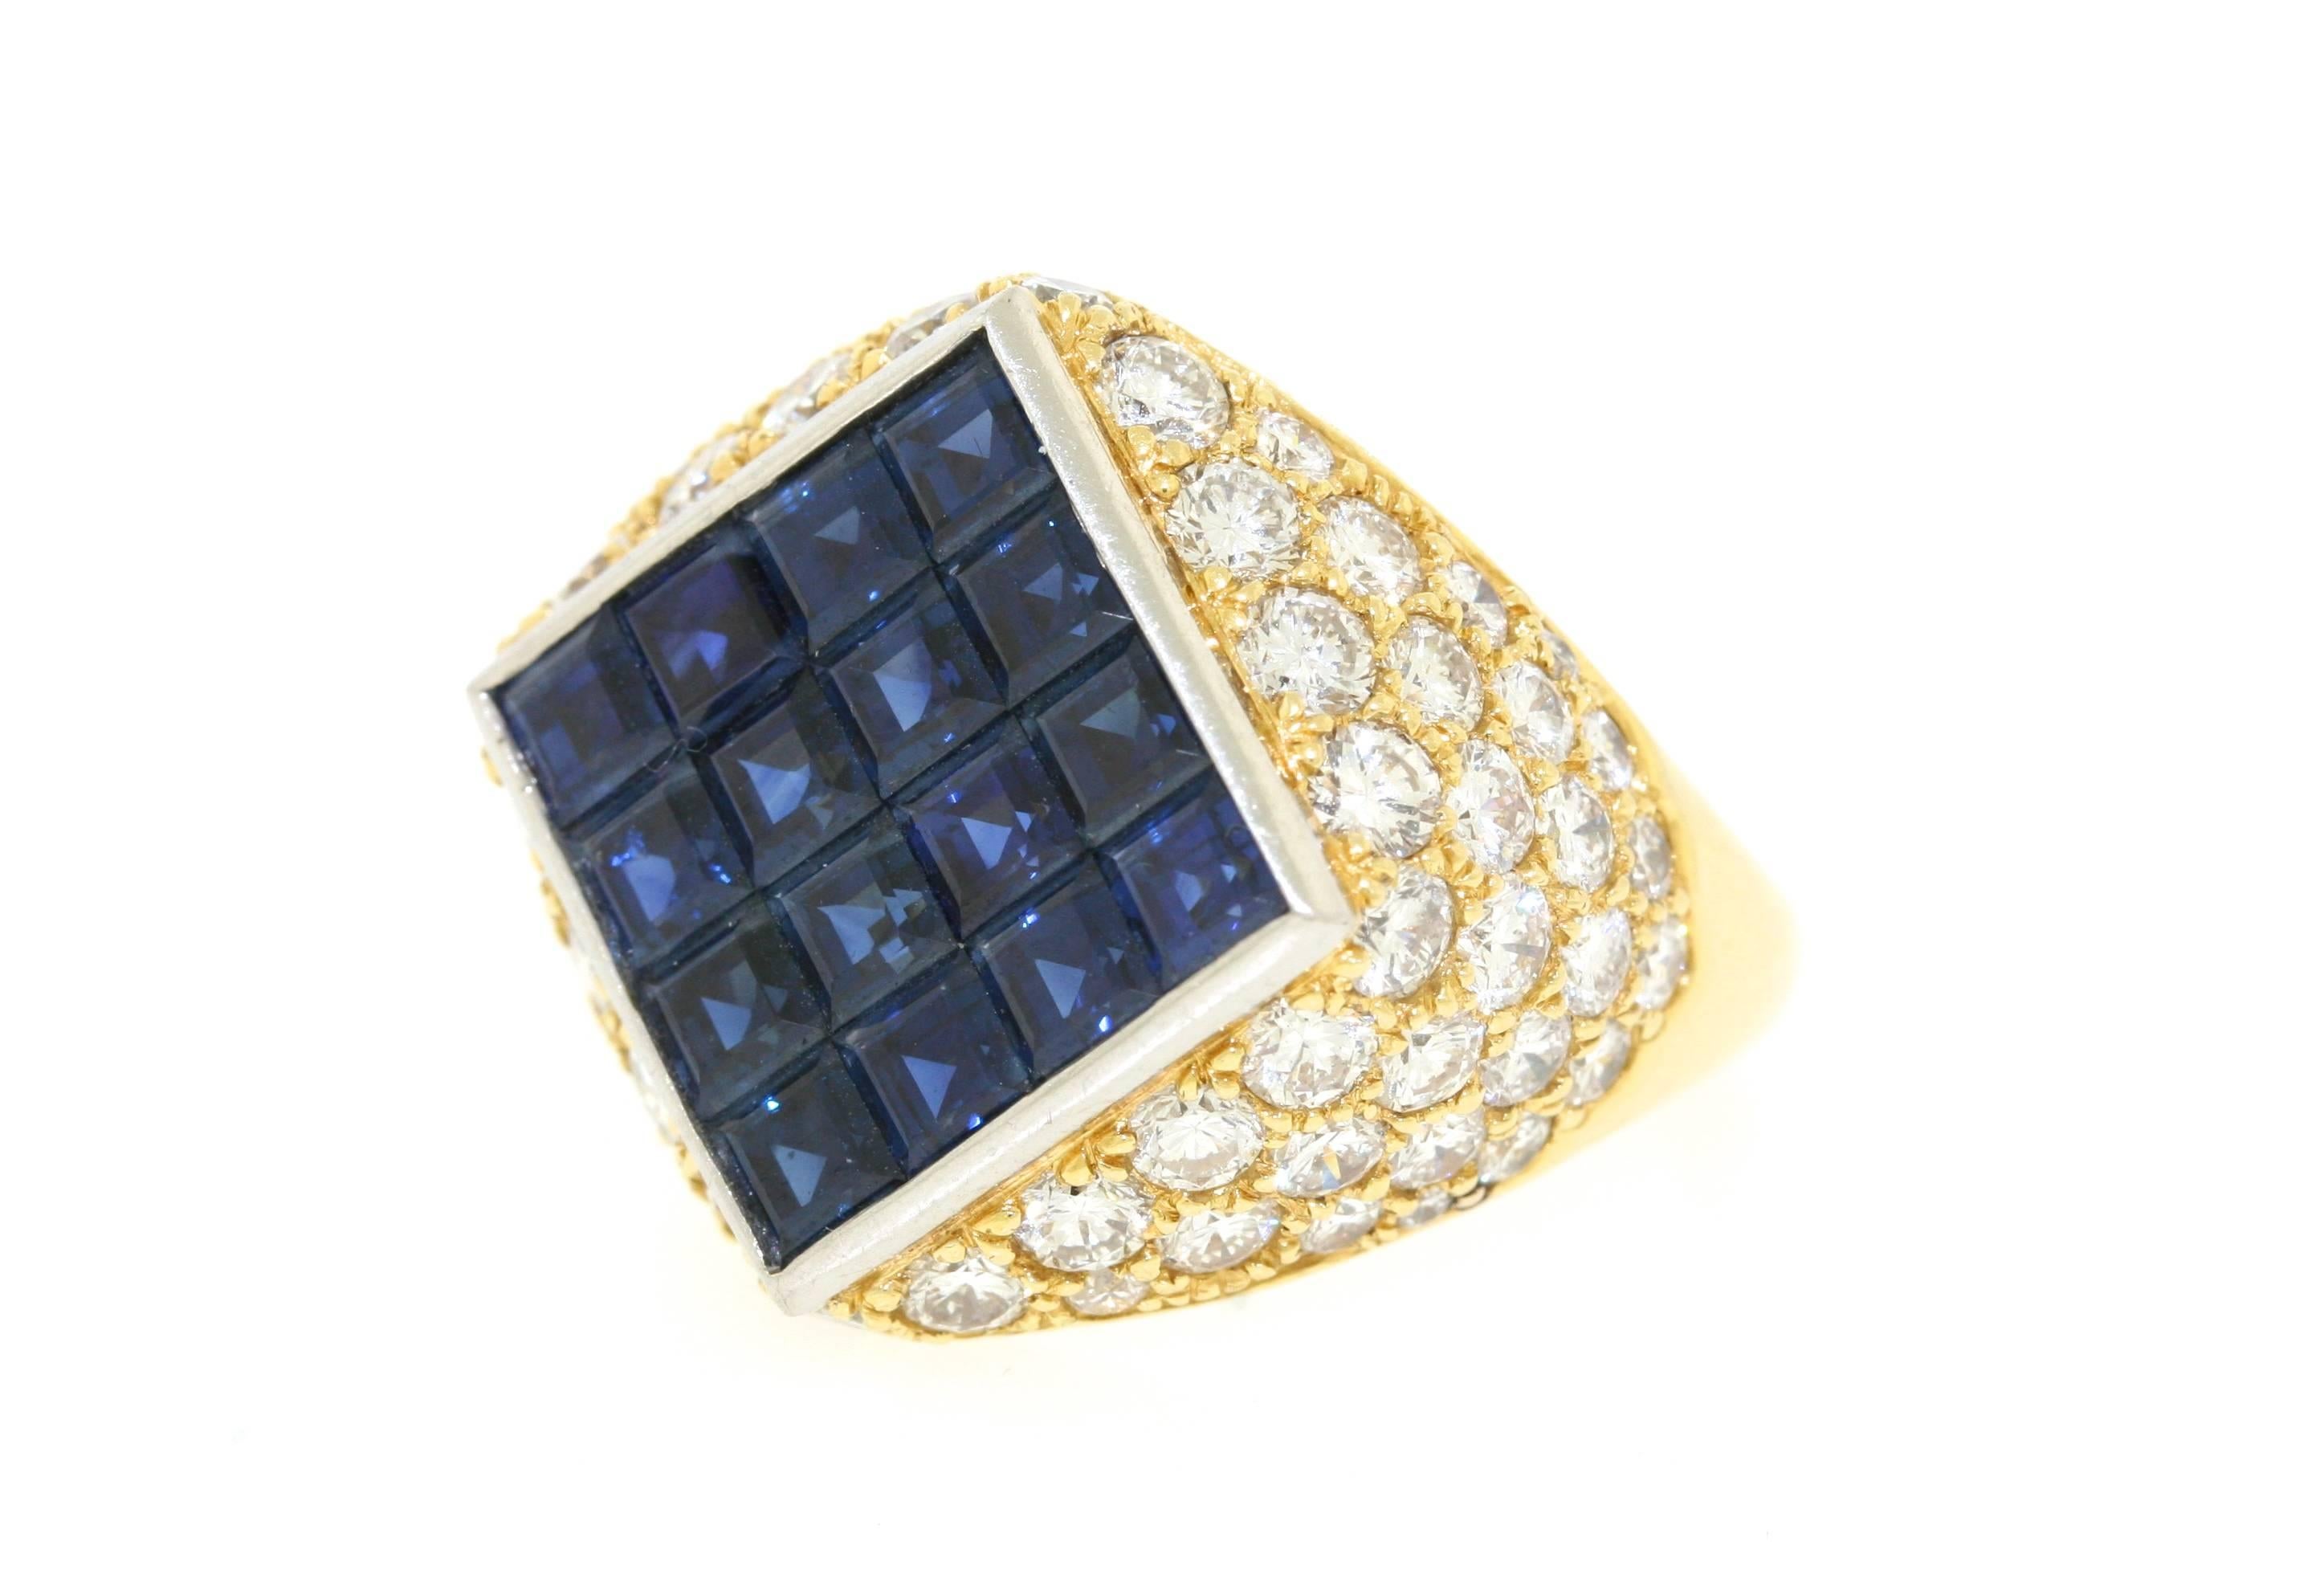 Van Cleef & Arpels 18k gold and platinum ring of a bombe design centering a square top with 16 mystery-set calibre-cut sapphires in a surround of pave-set diamonds. Size 6. Signed VCA NY 52889. Circa 1982